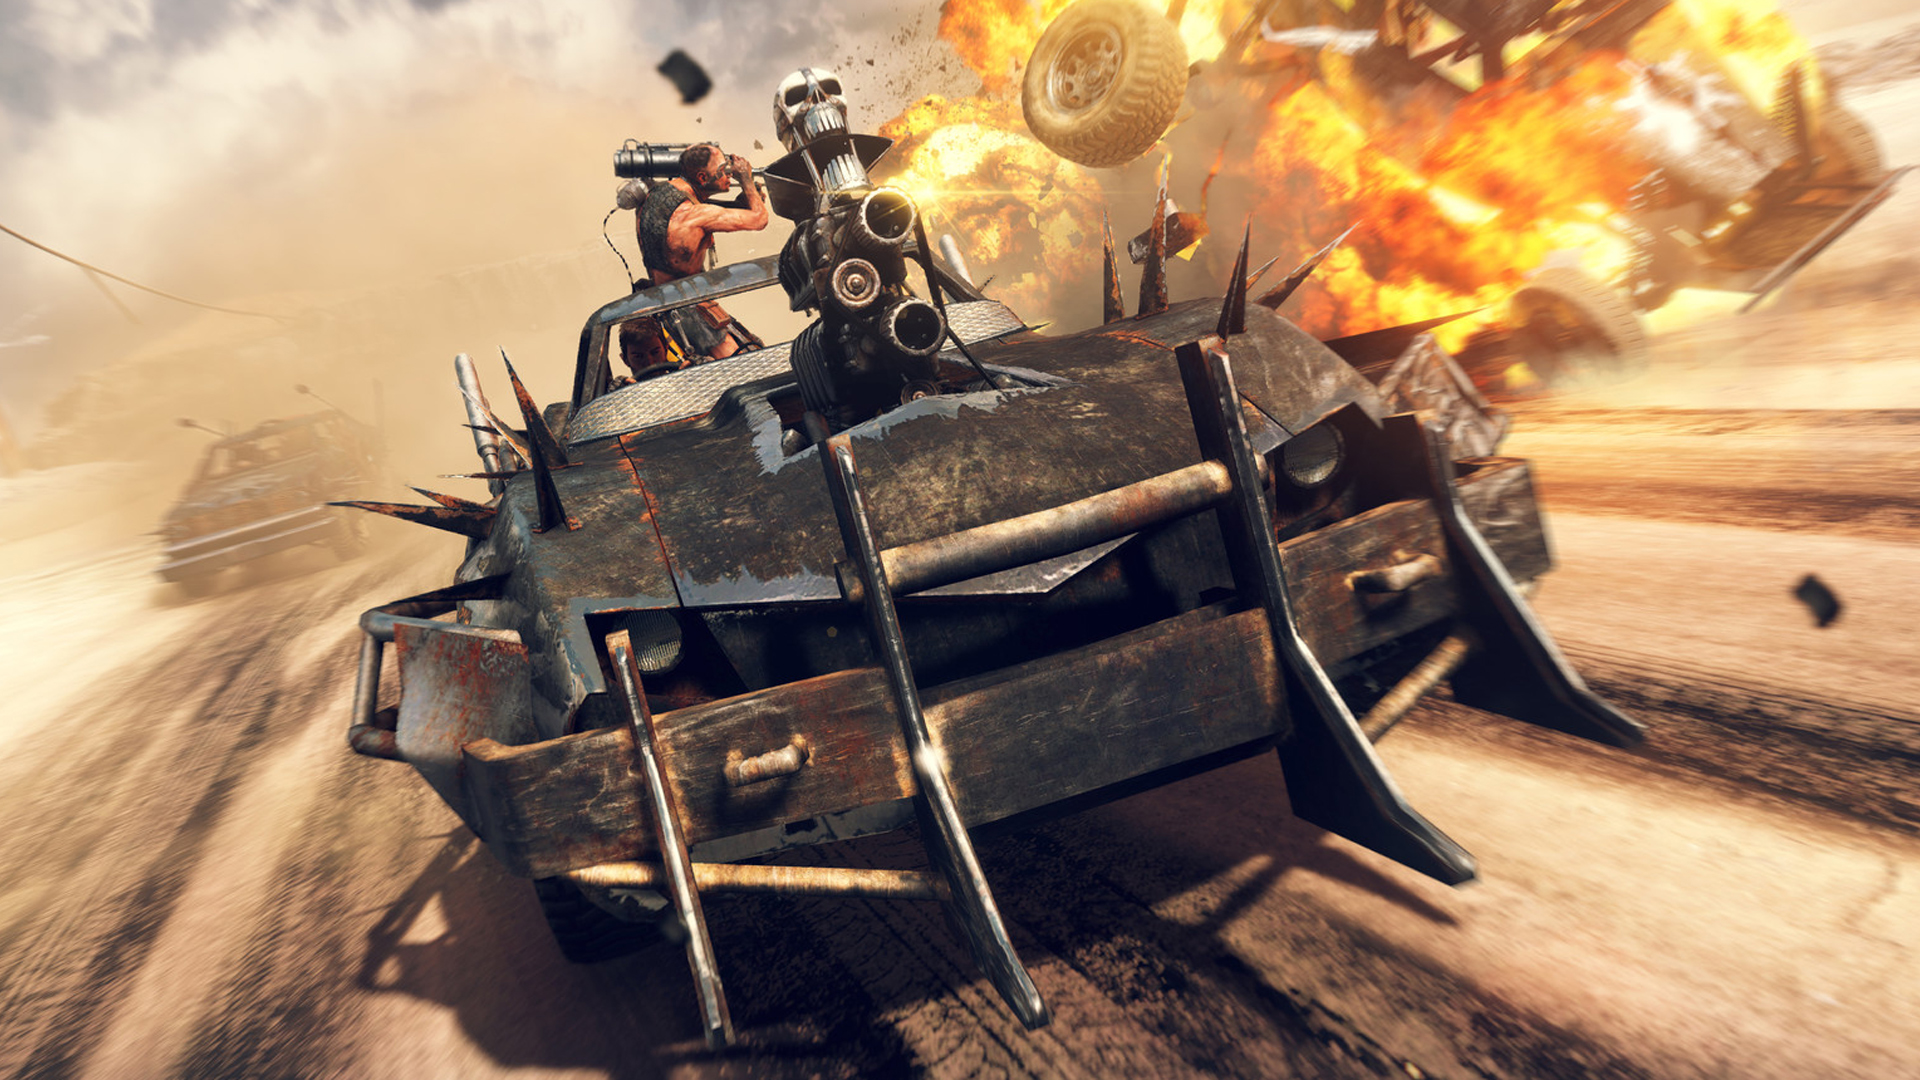 Looks like a Mad Max 2 could be on the cards